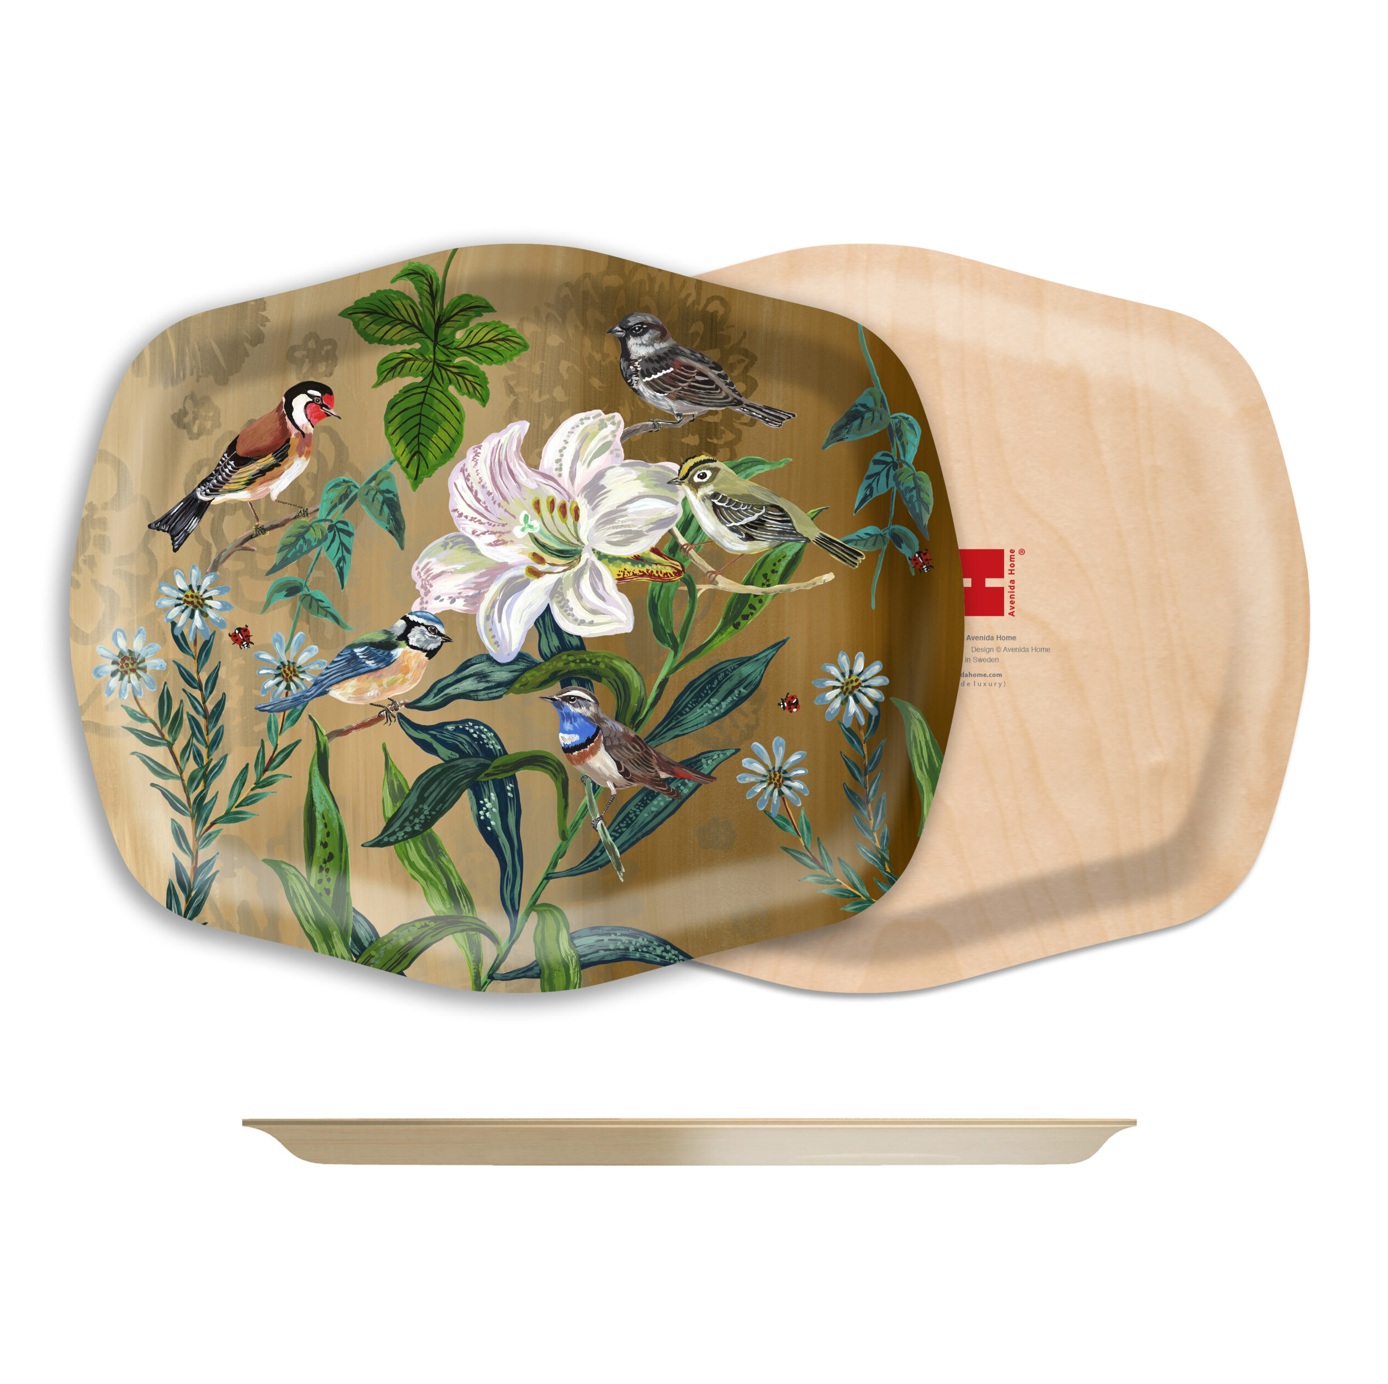 front, back, and side of a a decorative birchwood tray with birds and flowers on it